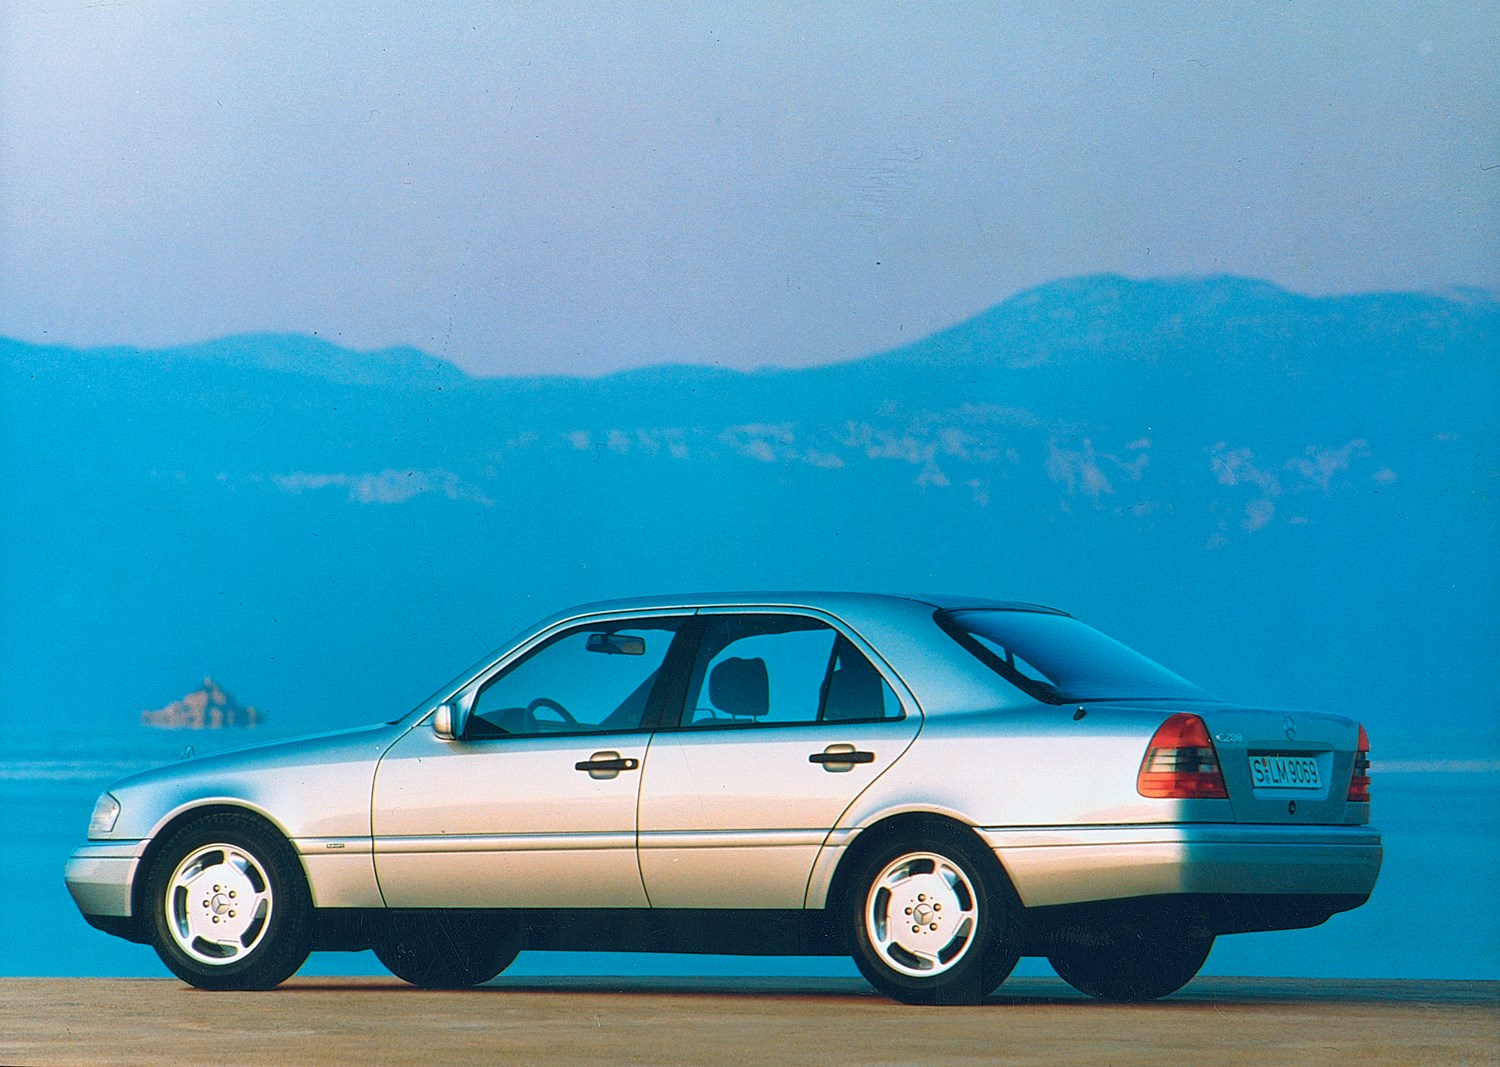 Used Mercedes-Benz C-Class Saloon (1993 - 2000) Review ...